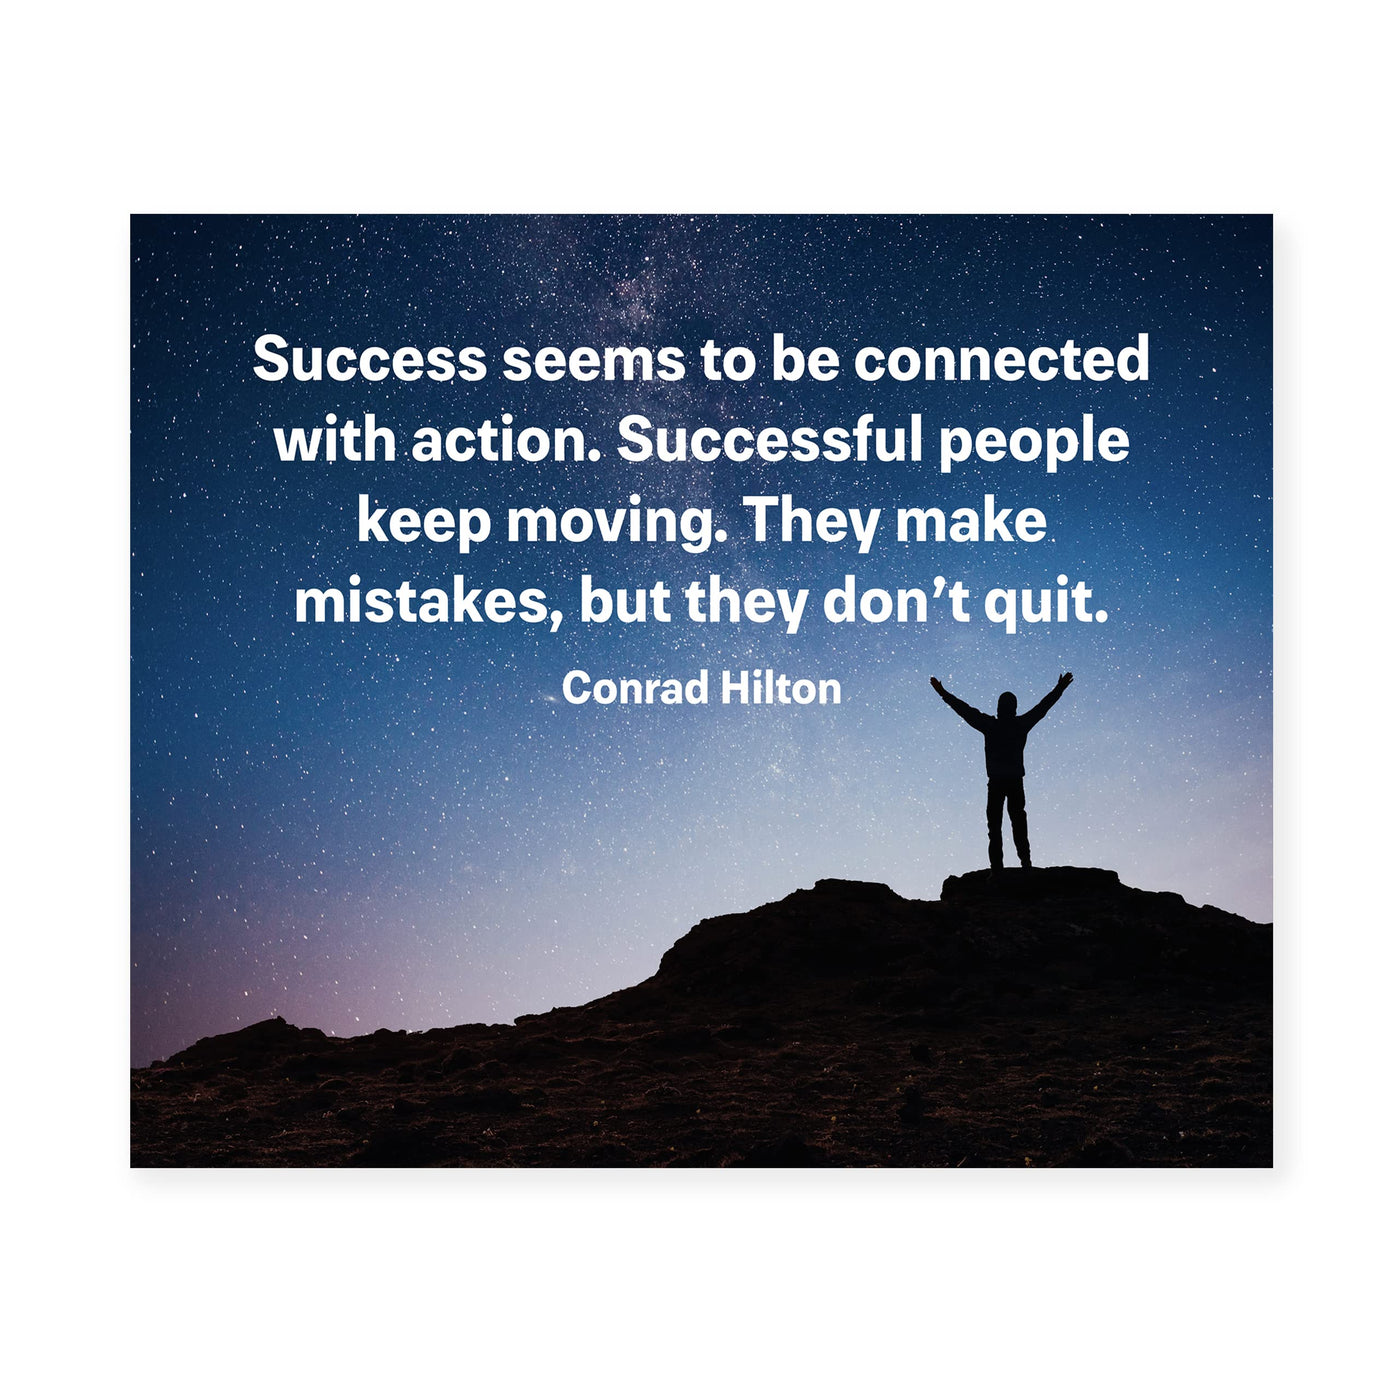 Conrad Hilton-"Success Connected With Action" Motivational Quotes Wall Art Decor-10 x 8" Starry Night Picture Print -Ready to Frame. Inspirational Home-Office-Work Decor. Great Gift of Motivation!